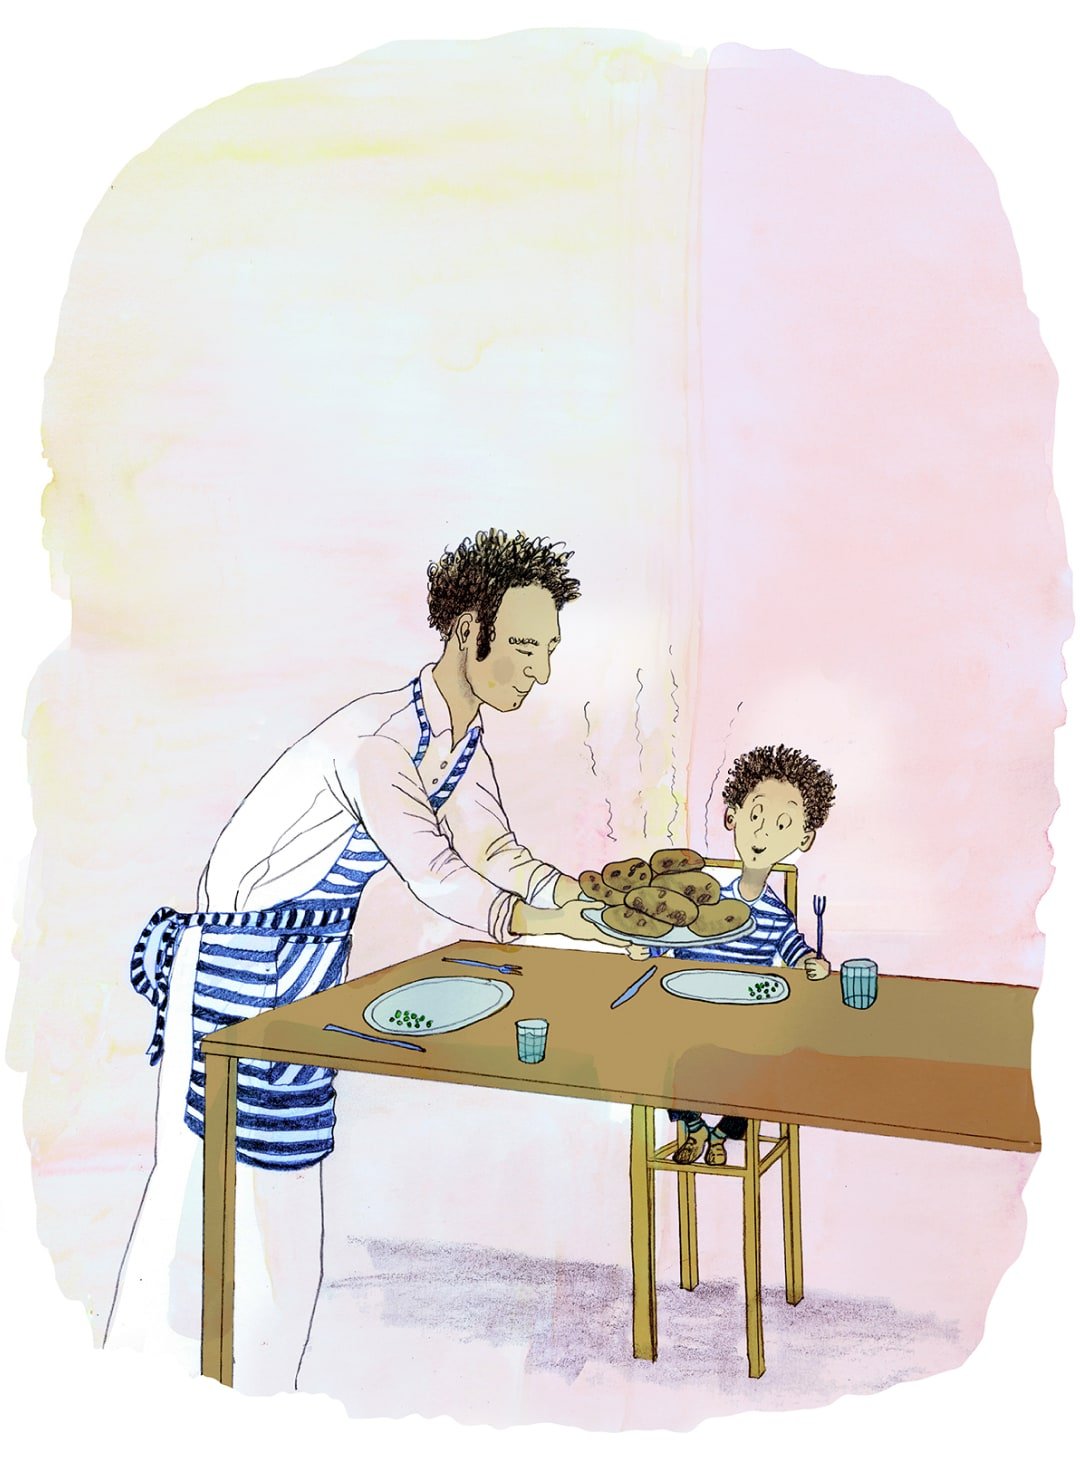 A man in a white shirt, and blue and white striped apron brings a plate of steaming hot baked potatoes to his surprised looking son.